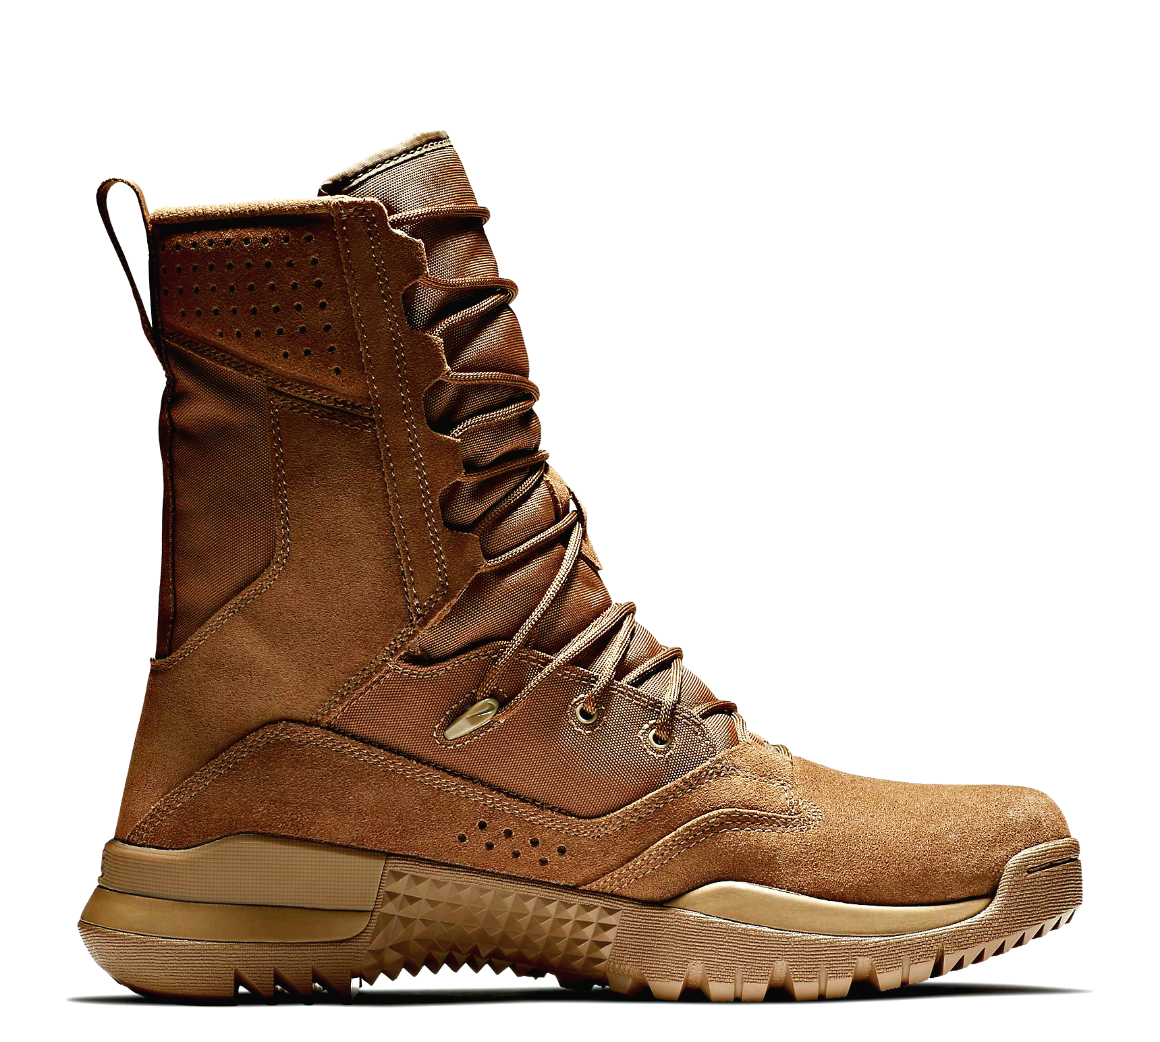 NIKE SFB FIELD 2 8" Coyote Leather Boots